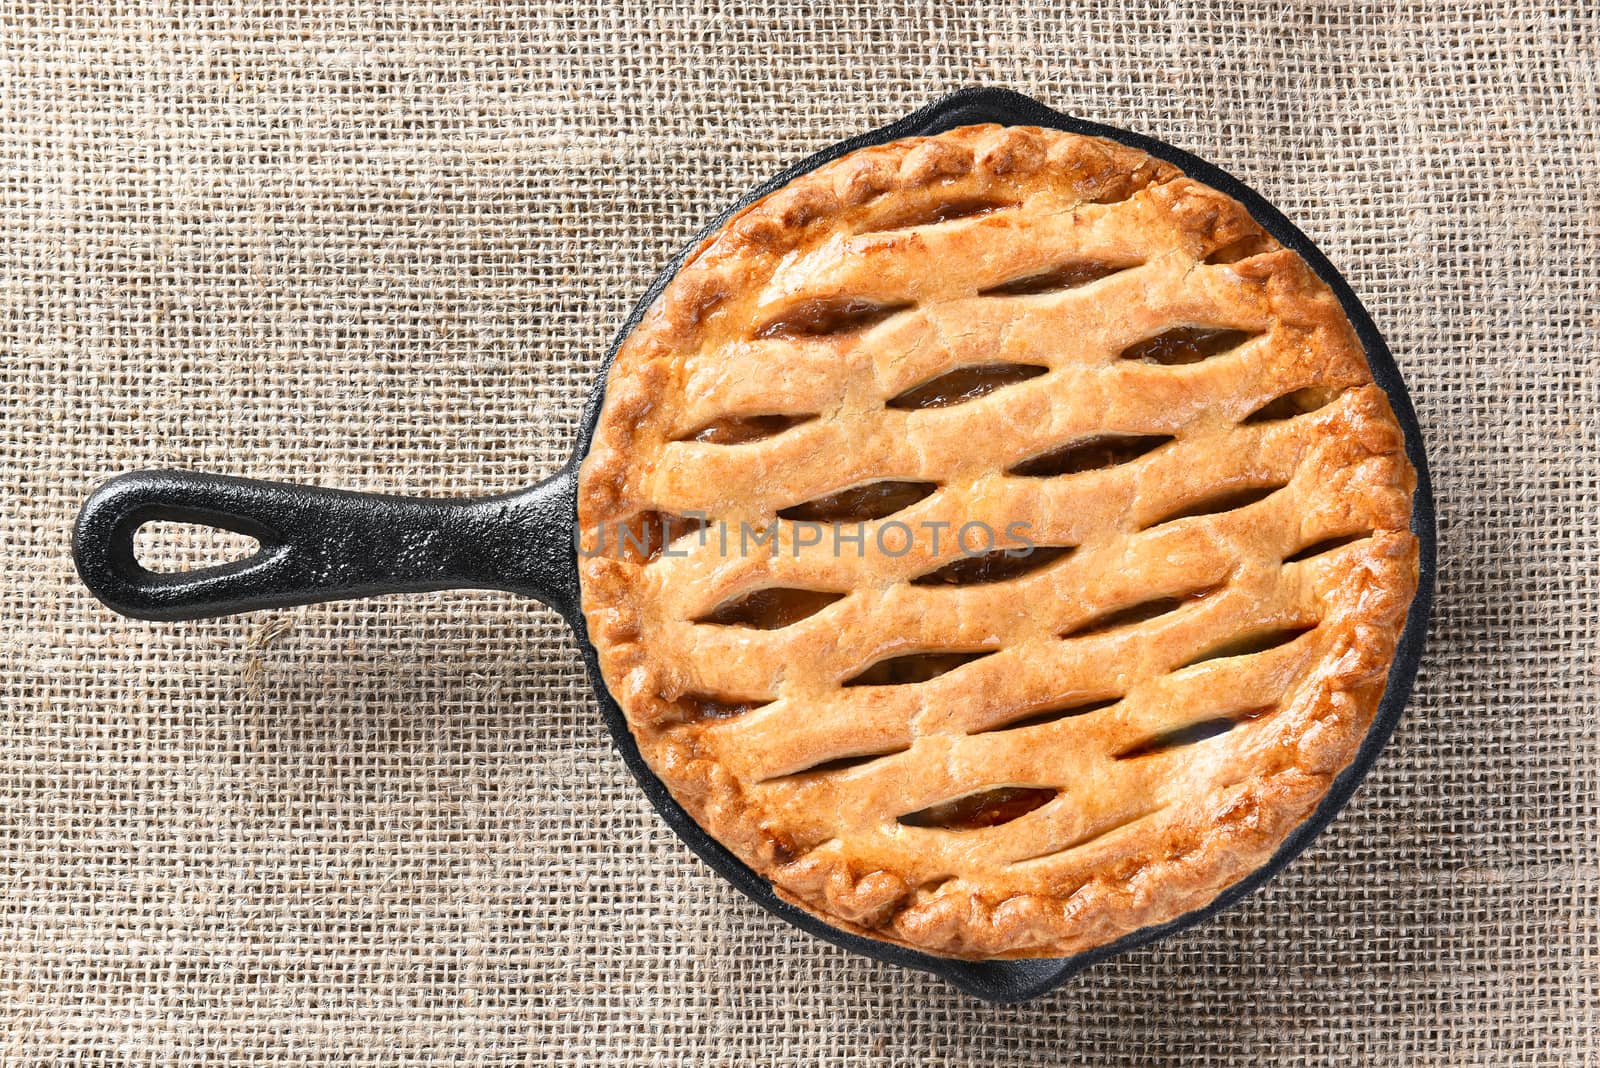 High angle view of a skillet baked apple pie n a burlap table cloth. 